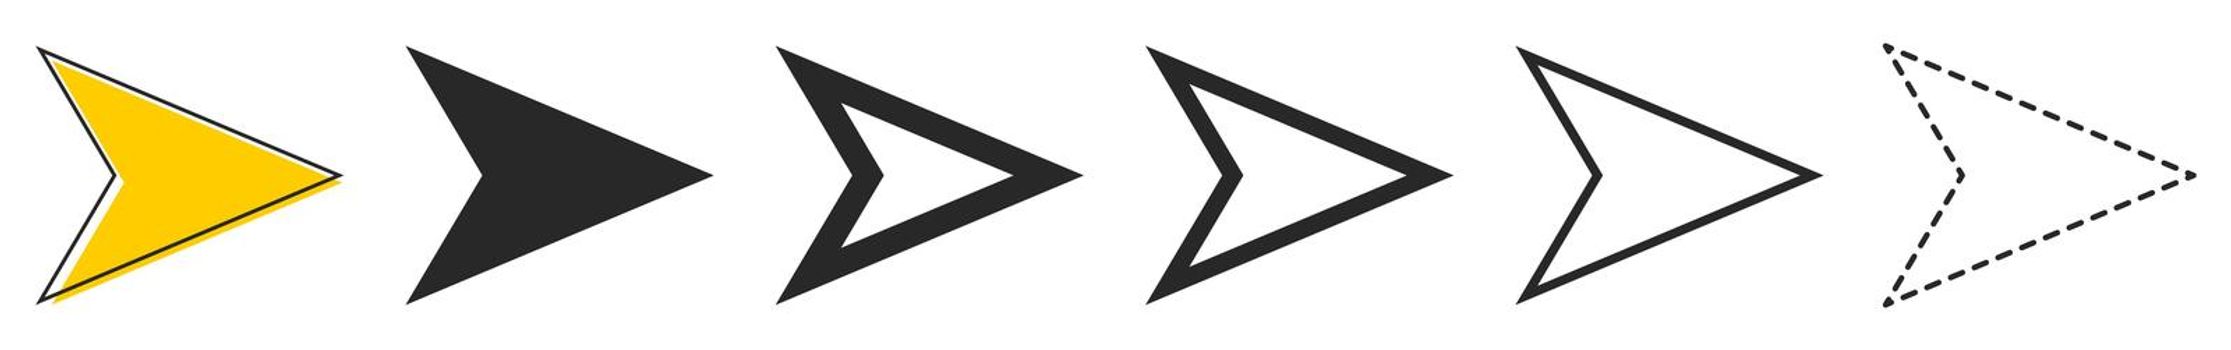 Arrows vector icons. Set of arrows on white background. Vector illustration. Various black arrows to right.